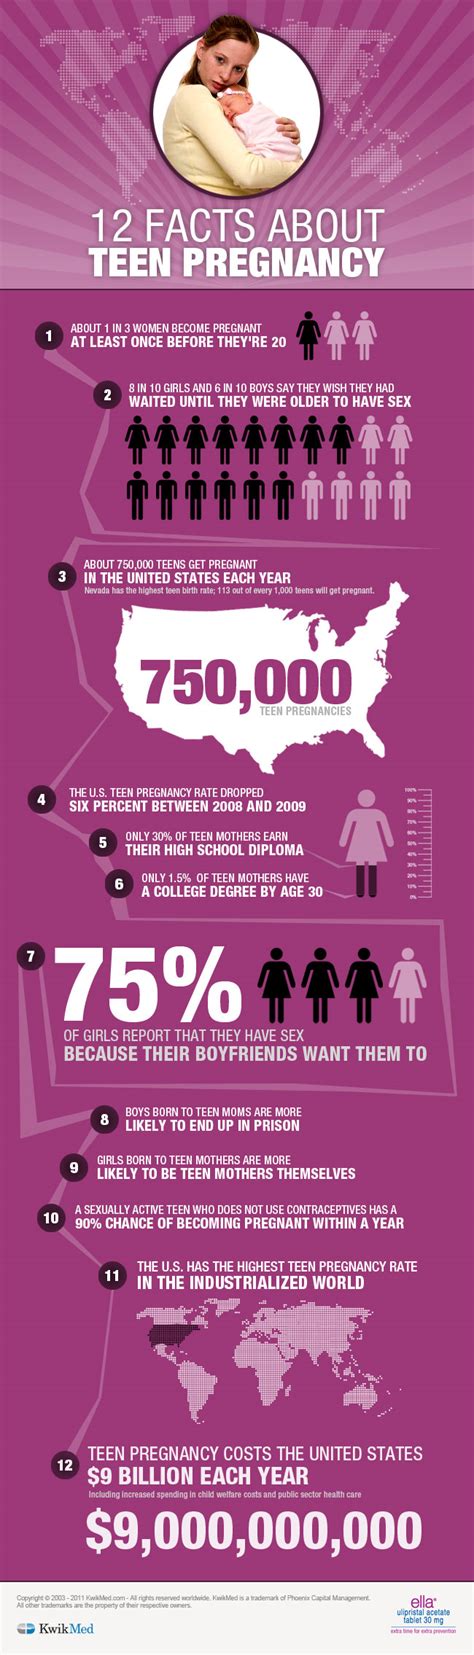 12 Facts About Teen Pregnancy Infographic Kwikmed